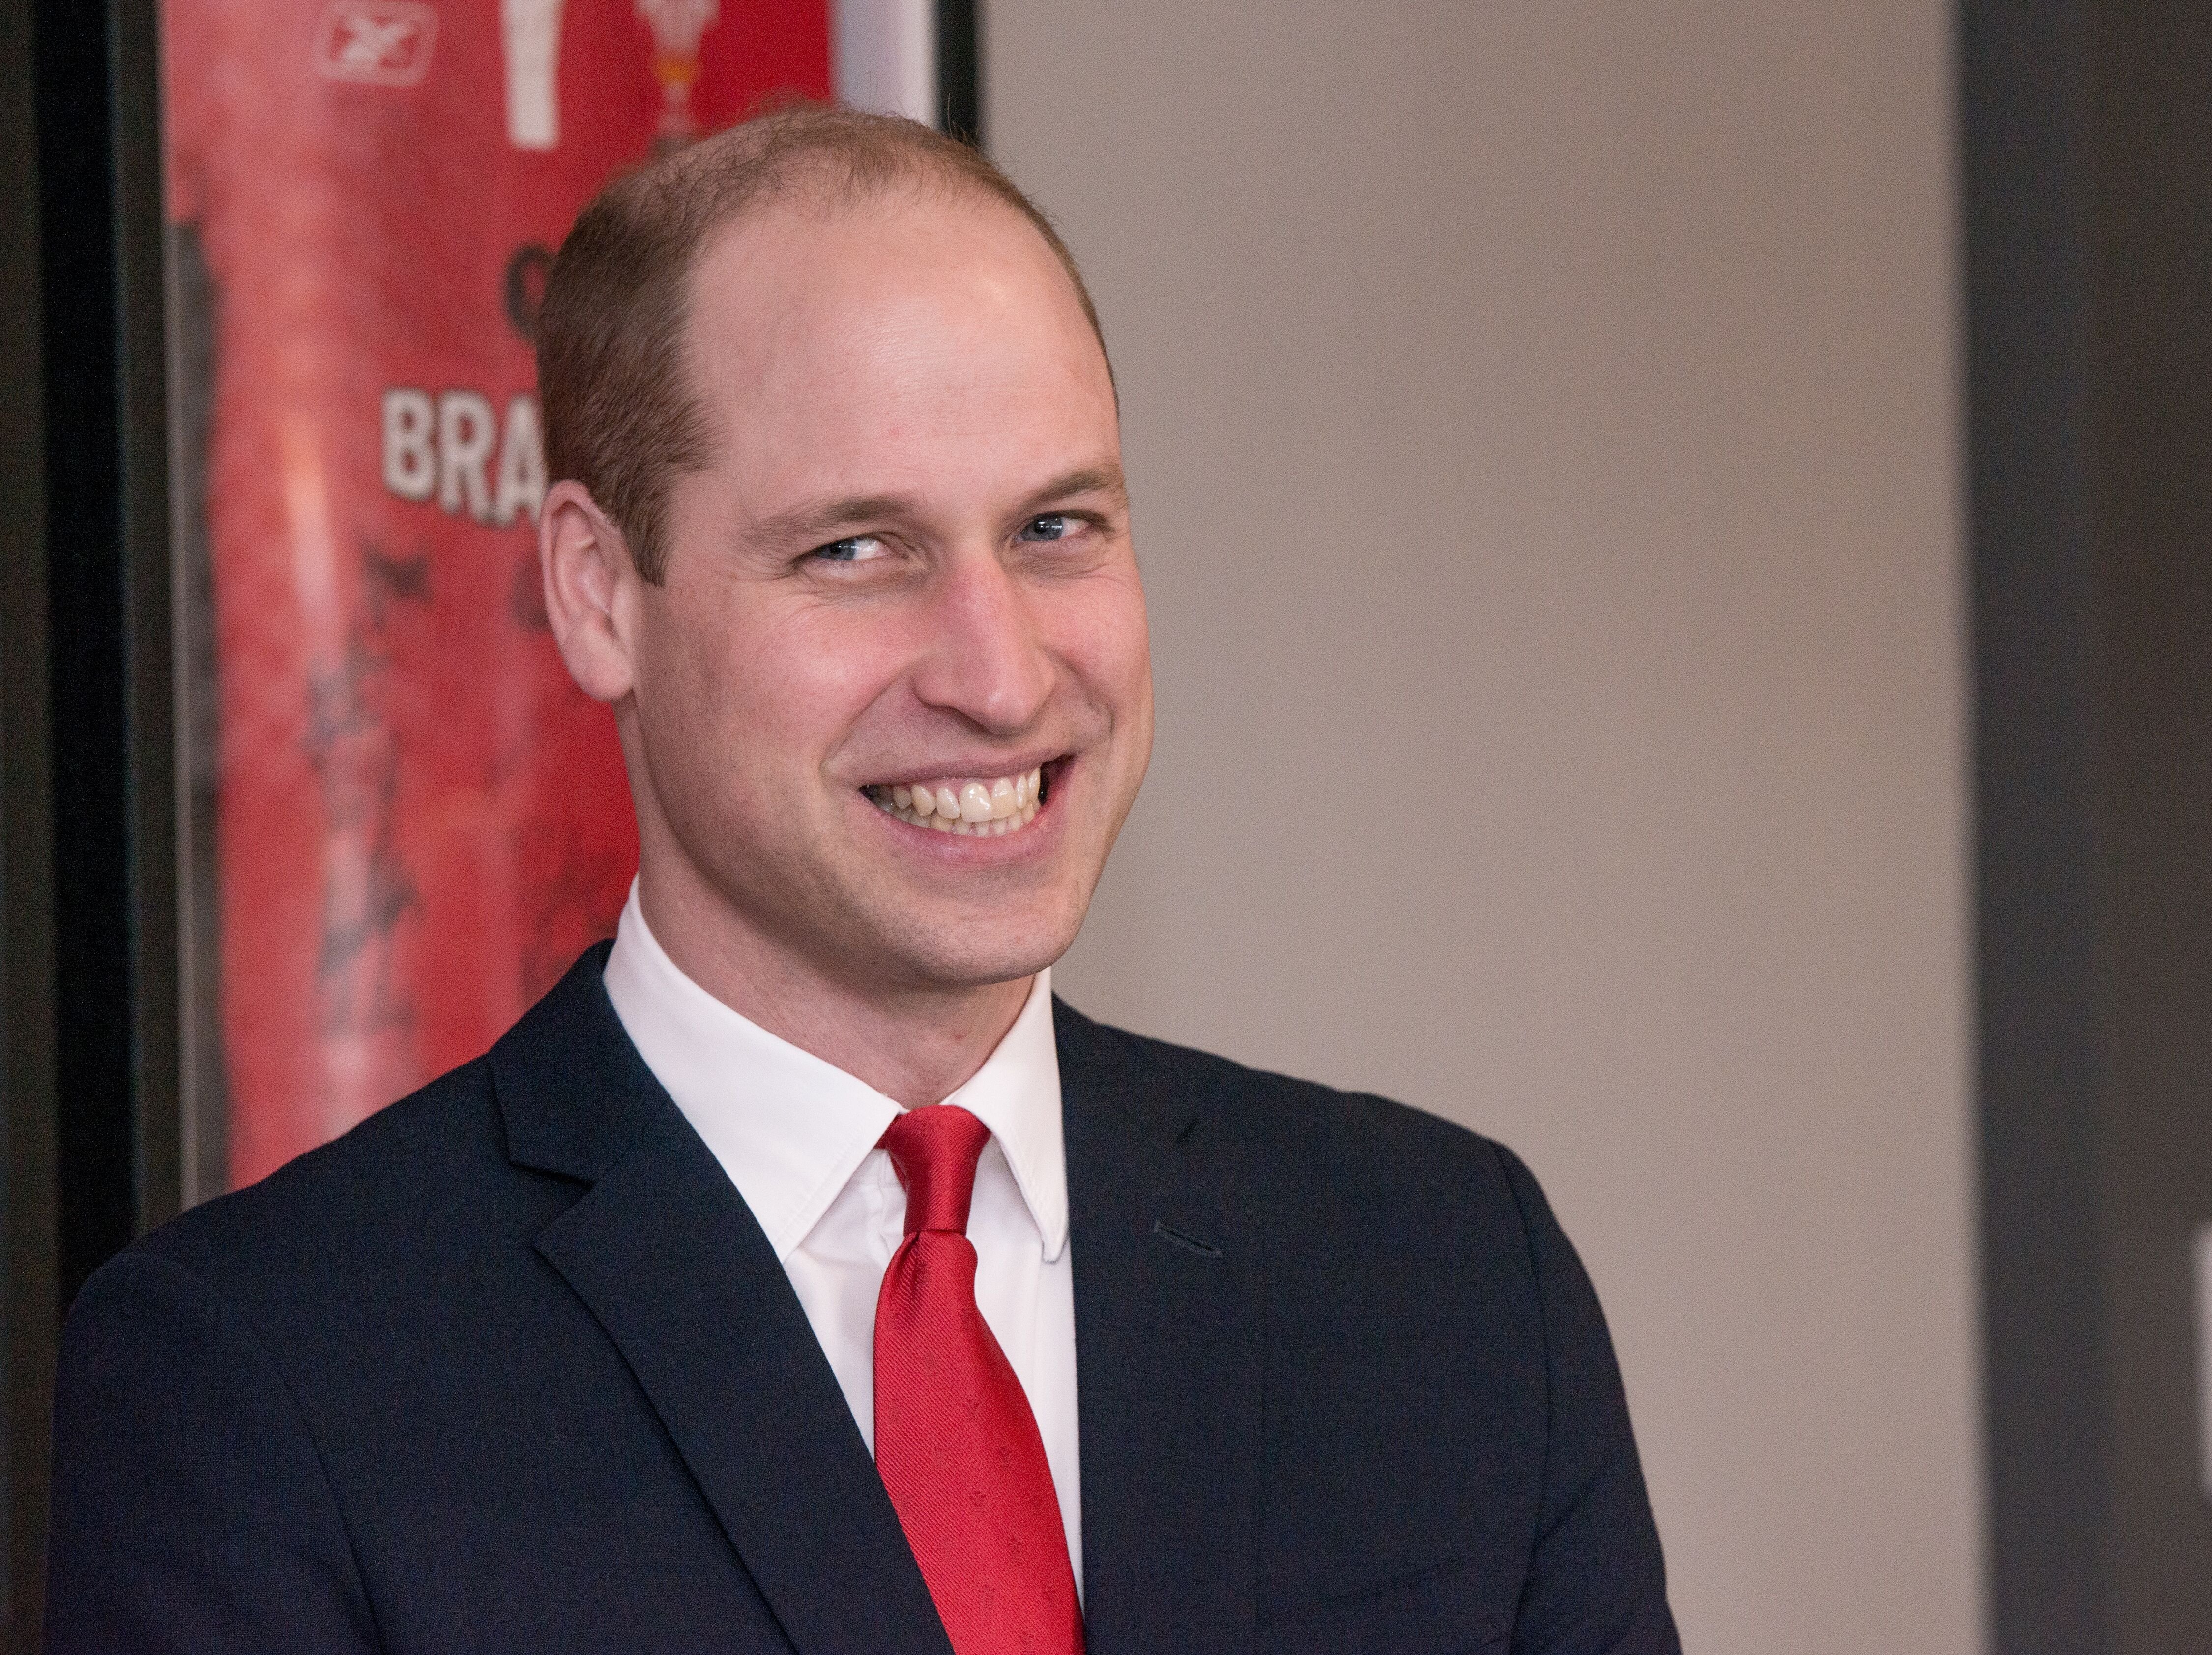 Duke of Cambridge officially opens Brains Brewery, before attending the Wales vs Ireland Six Nations Match on March 16, 2019 in Cardiff, Wales | Photo: Getty Images 